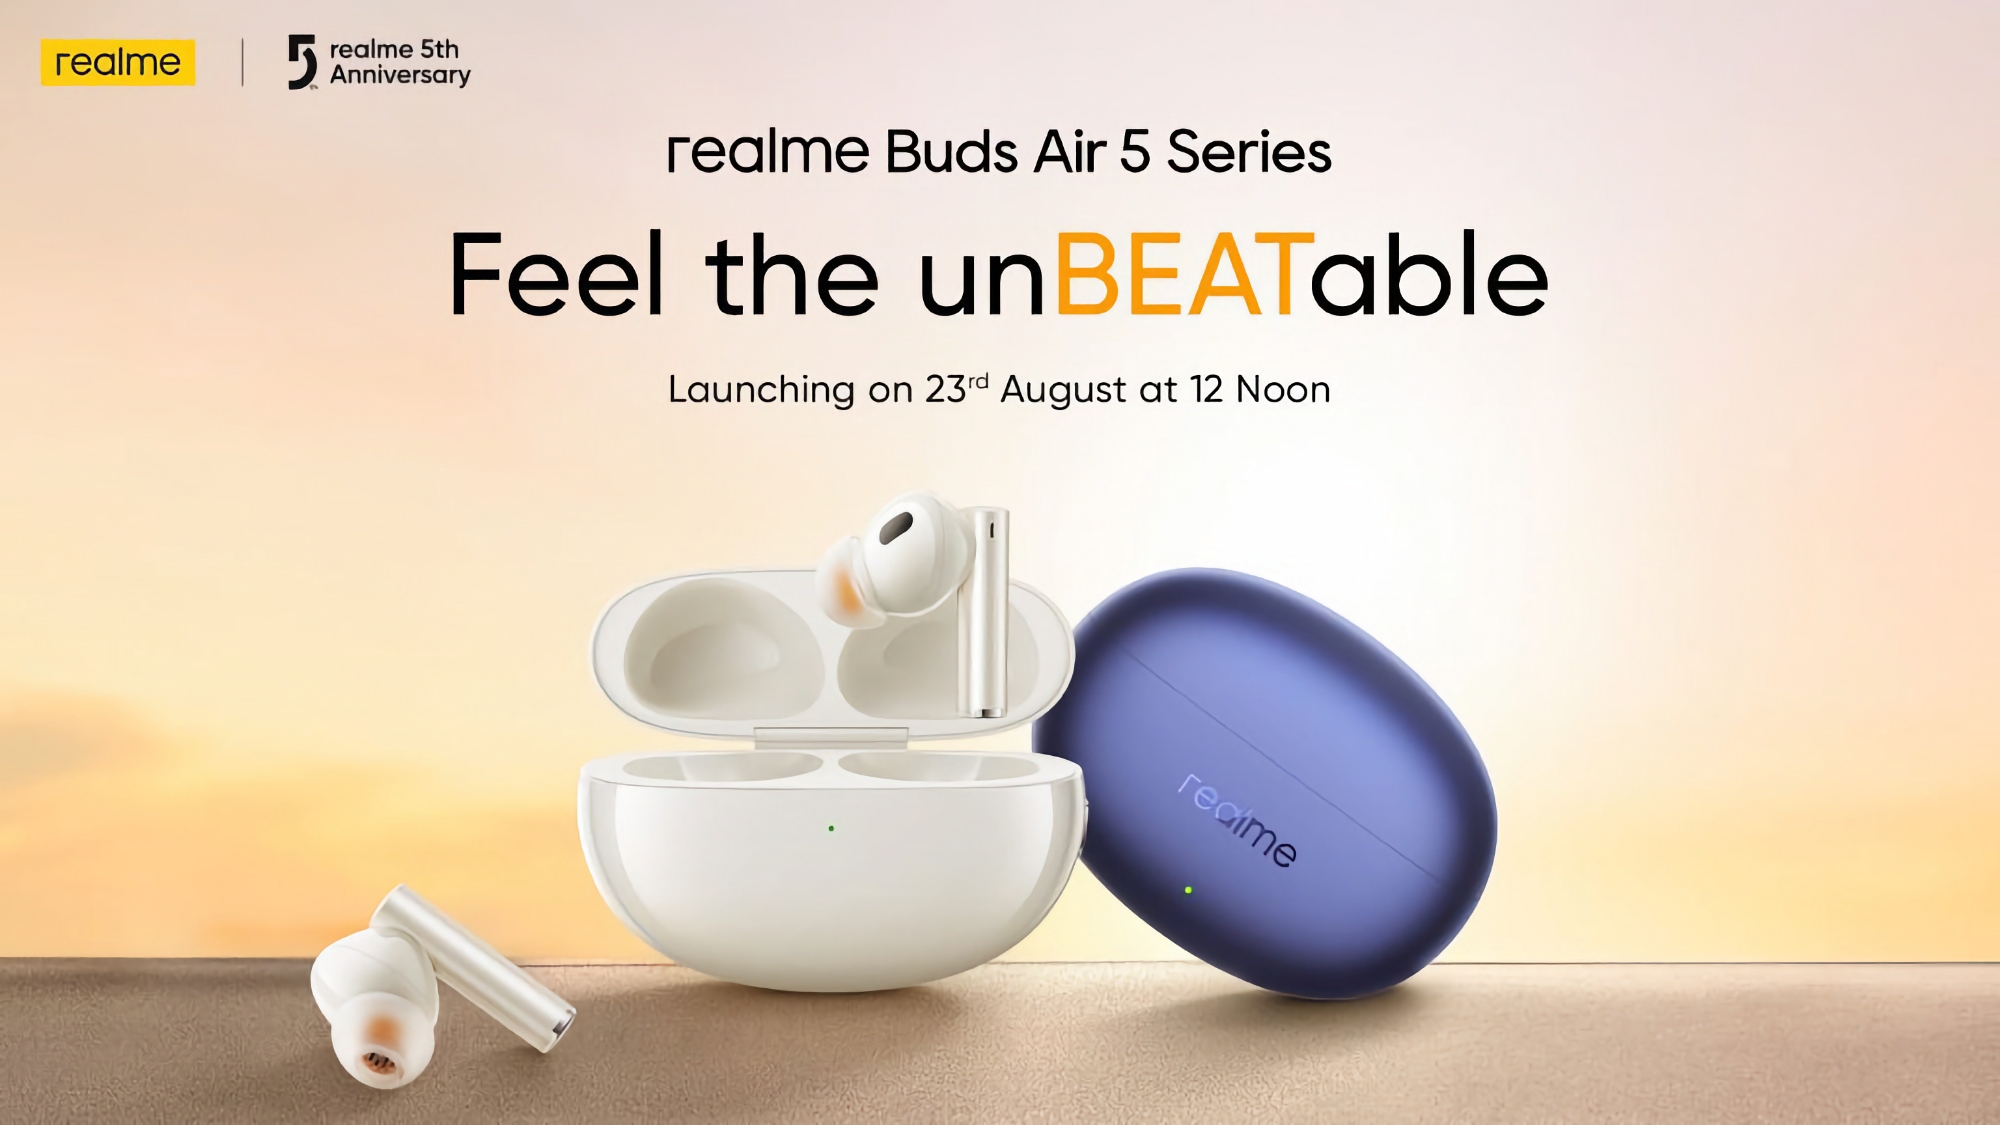 It's official: realme will unveil the TWS Buds Air 5 series August 23